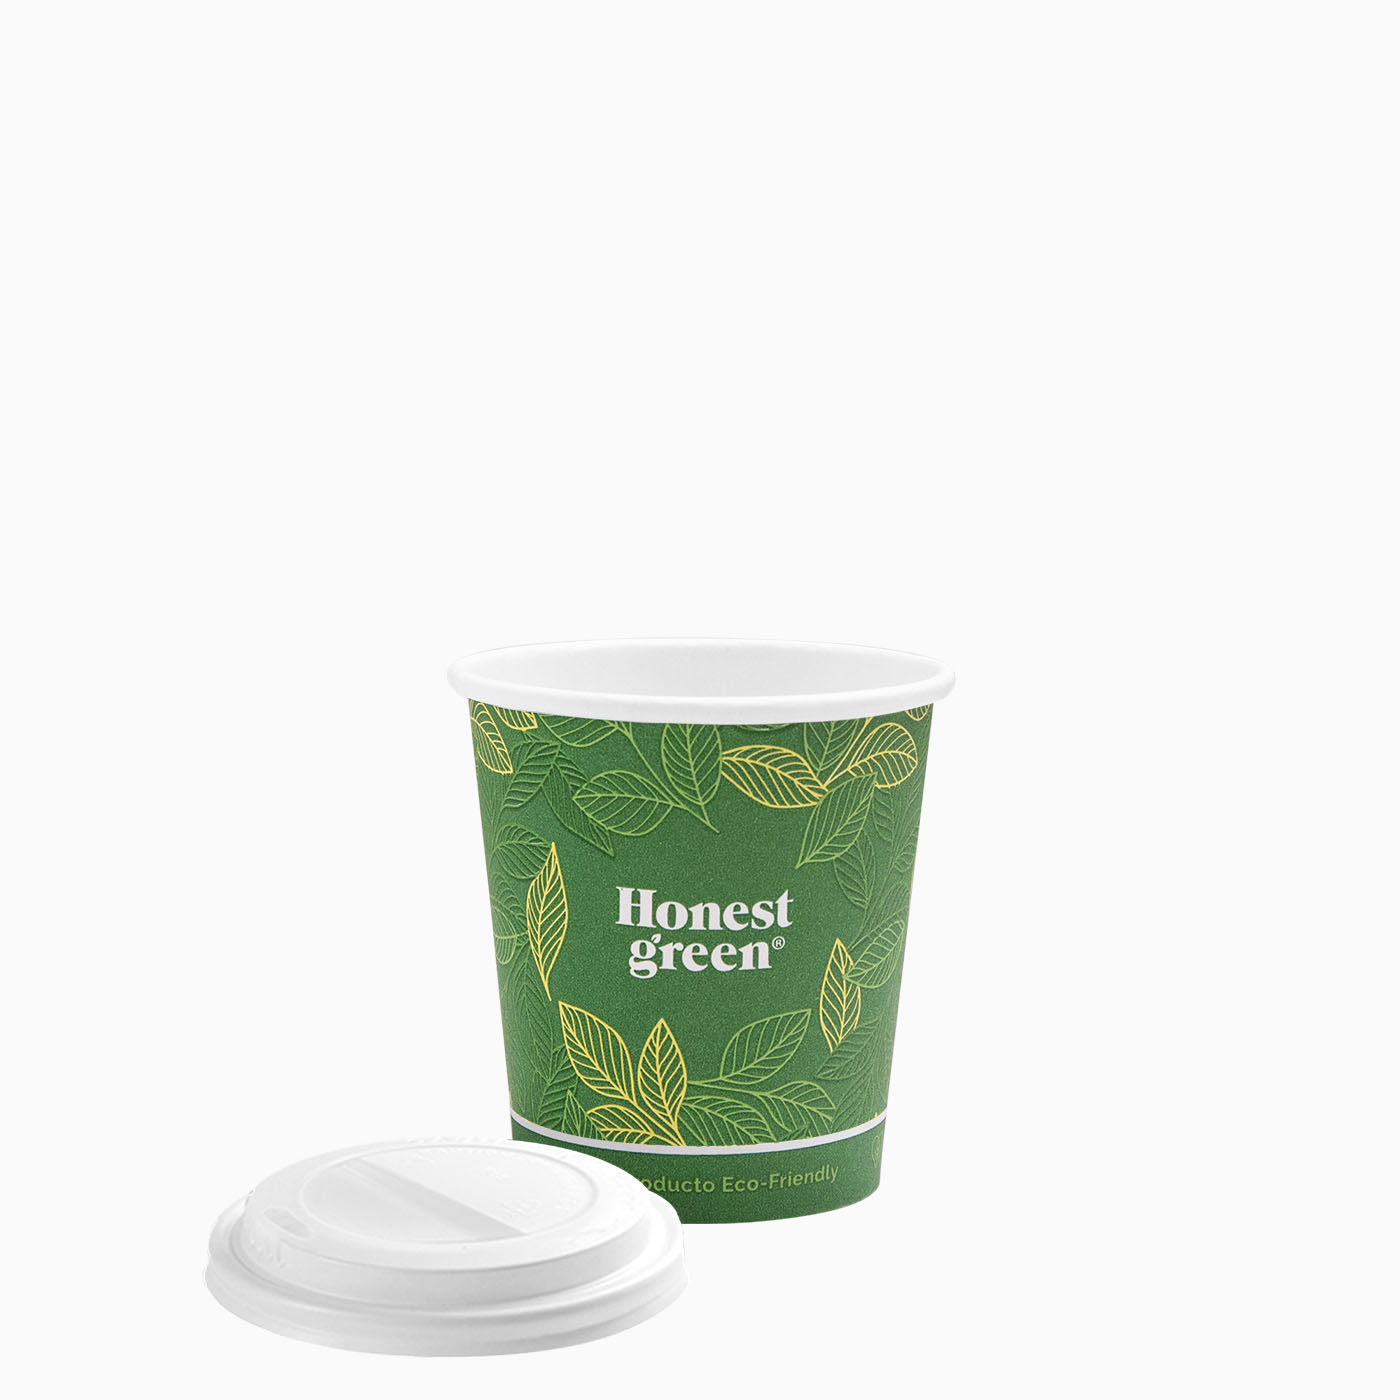 Eco Green cardboard with a small drink lid